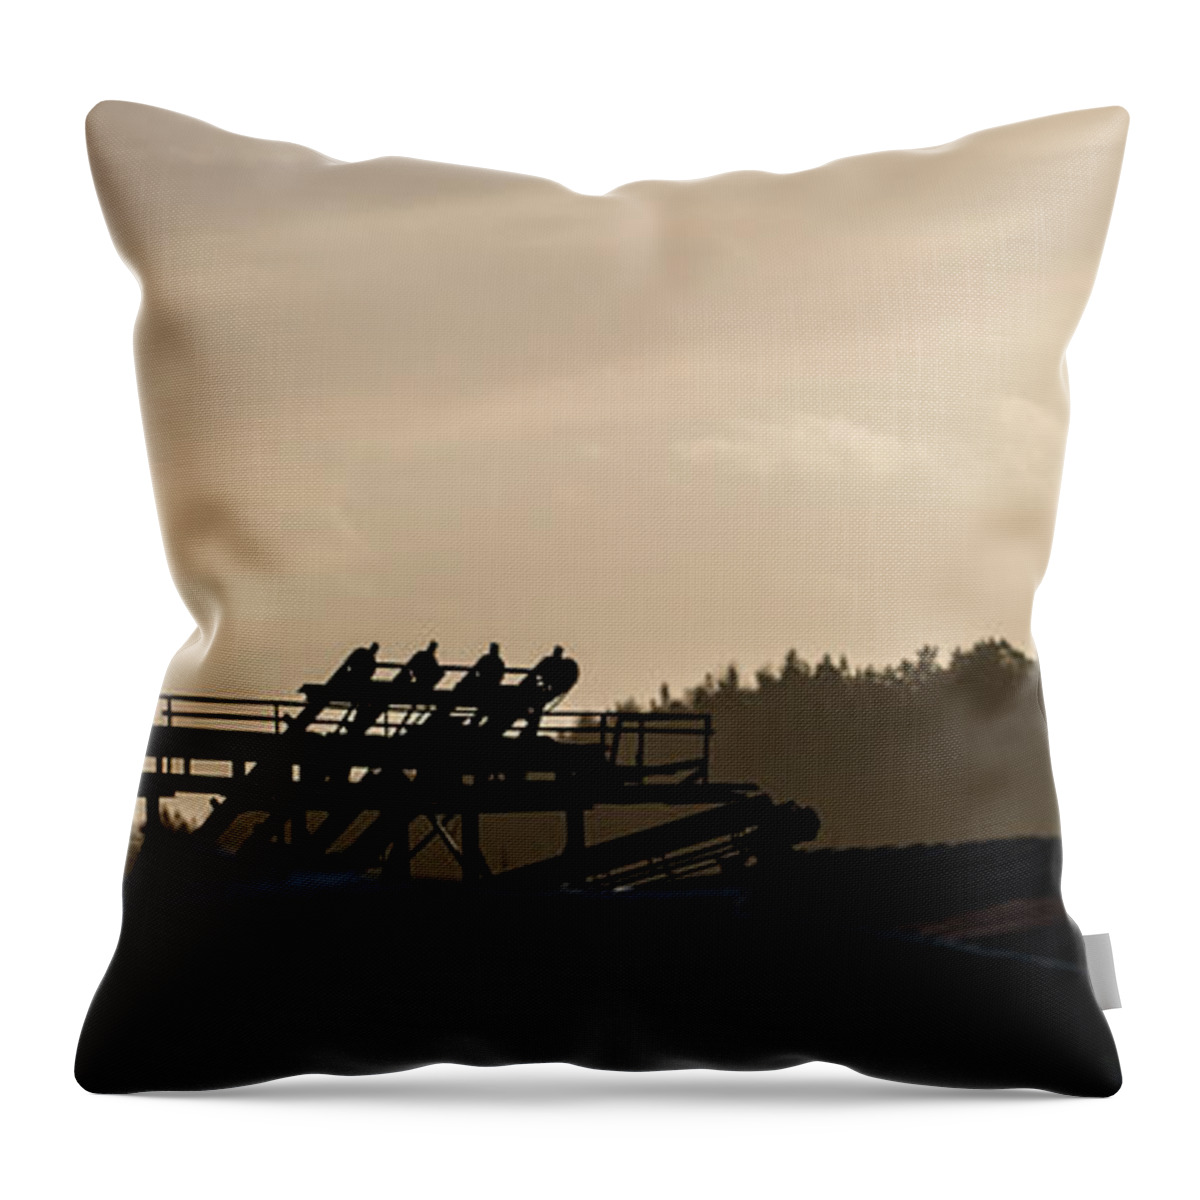 Sawmill Throw Pillow featuring the photograph The Old Sawmill by Torbjorn Swenelius